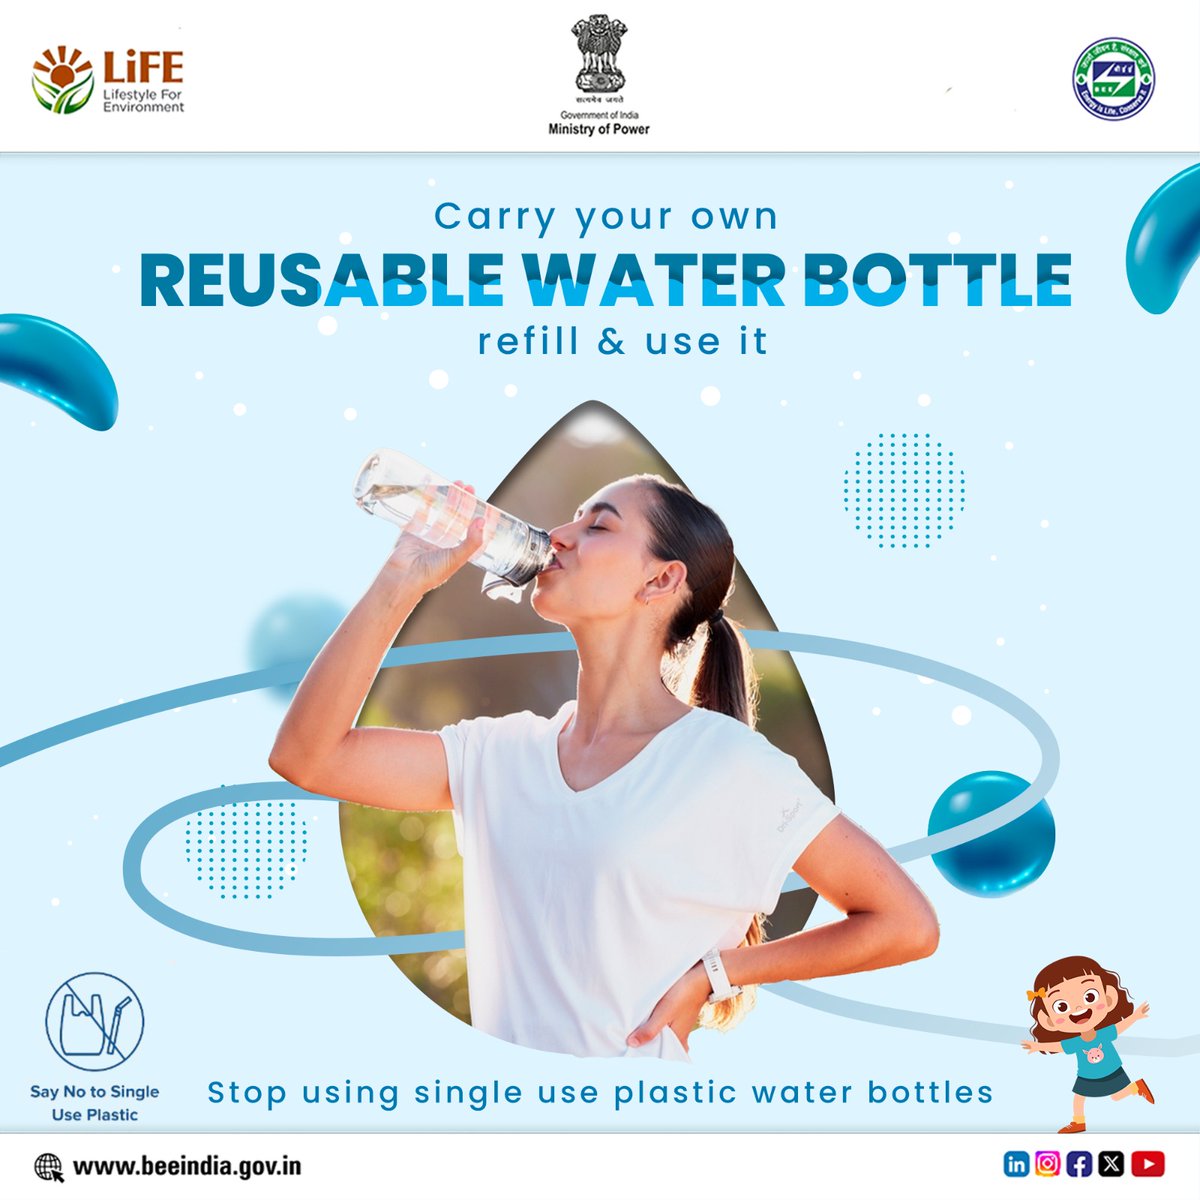 Disposed plastic bottles are one of the biggest contributors to plastic pollution and have great costs for our environment. Prefer using reusable bottle for a low-cost option, which is good for both, us and the environment! #ReducePlasticWaste #MissionLife